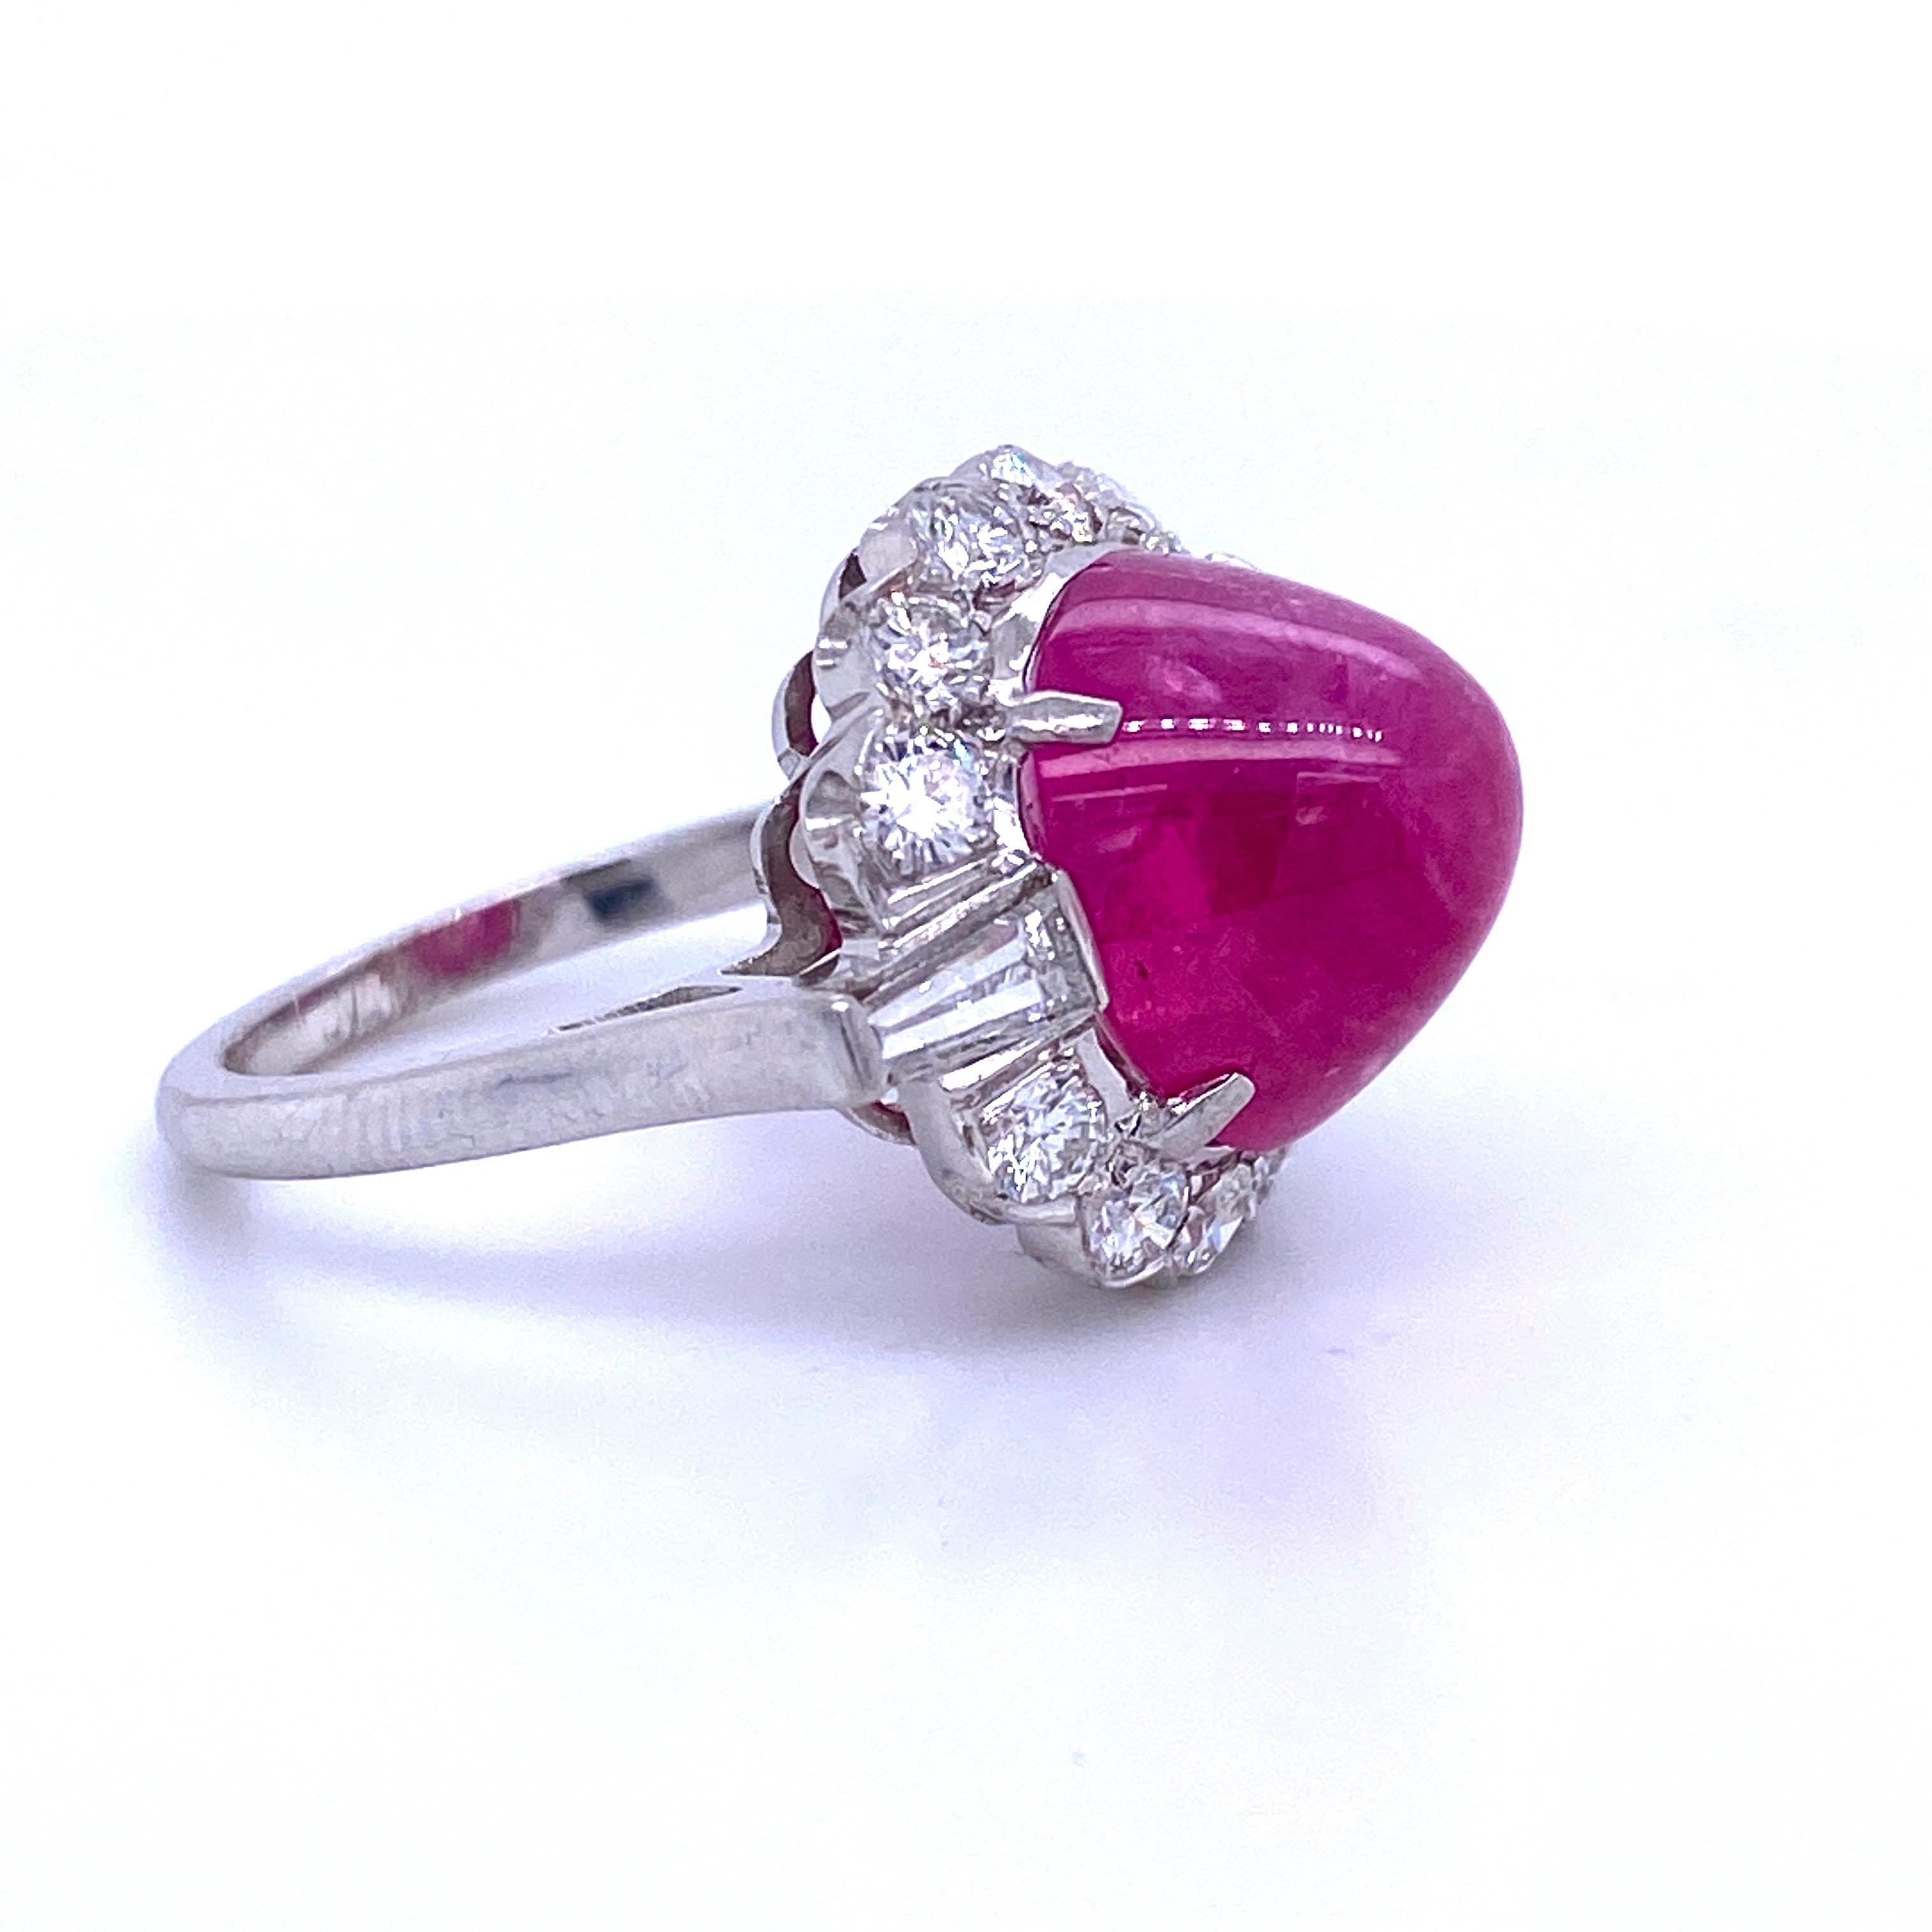 GIA Certified Sugar Loaf Ruby No Heat Diamond Ring Platinum 11.92 Carat In Excellent Condition For Sale In New York, NY